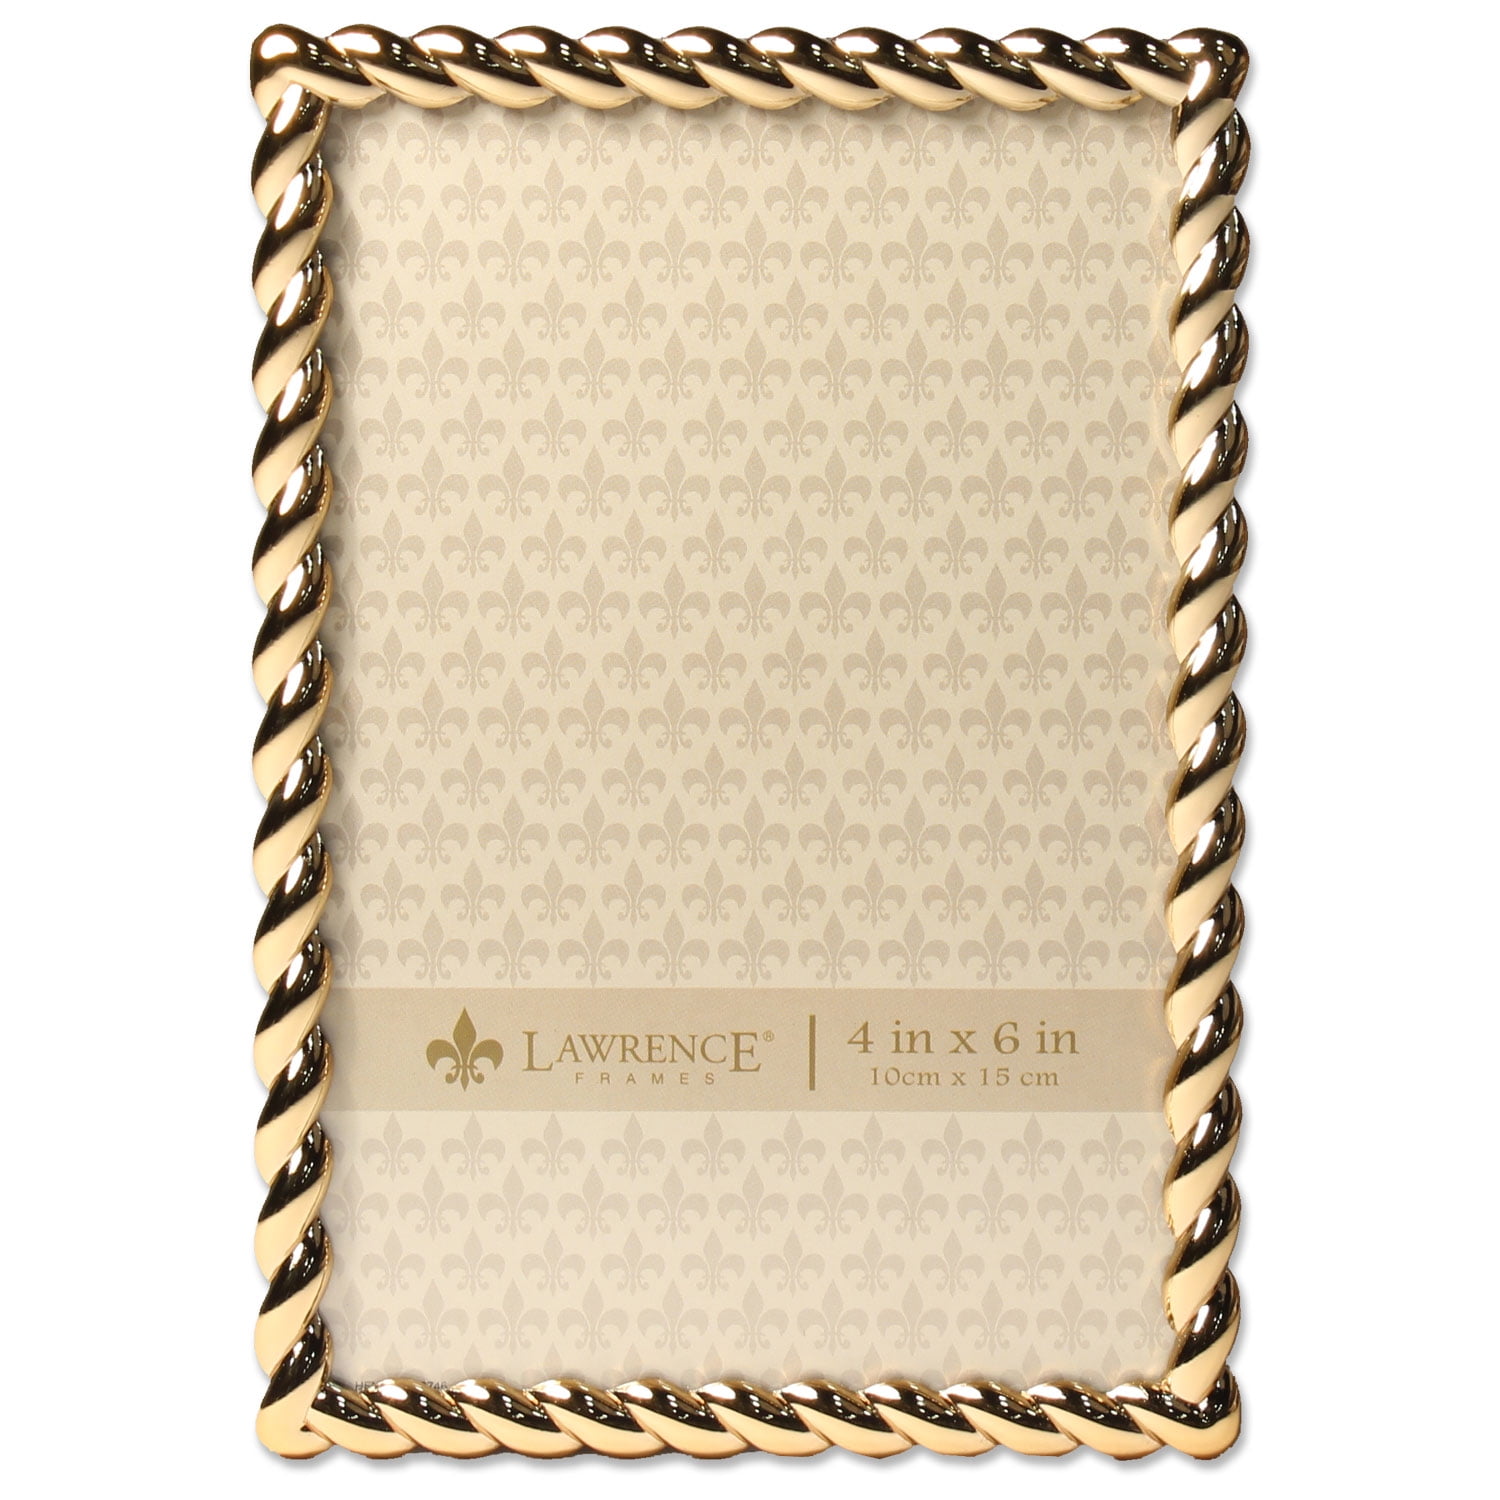 Giftgarden Gold 3.5x5 Picture Frame with Mat Set of 10, 4x6 Frame Matted to  3x5 Photo or Display 4x6 Picture Without Mat, Golden Frames for Wall and